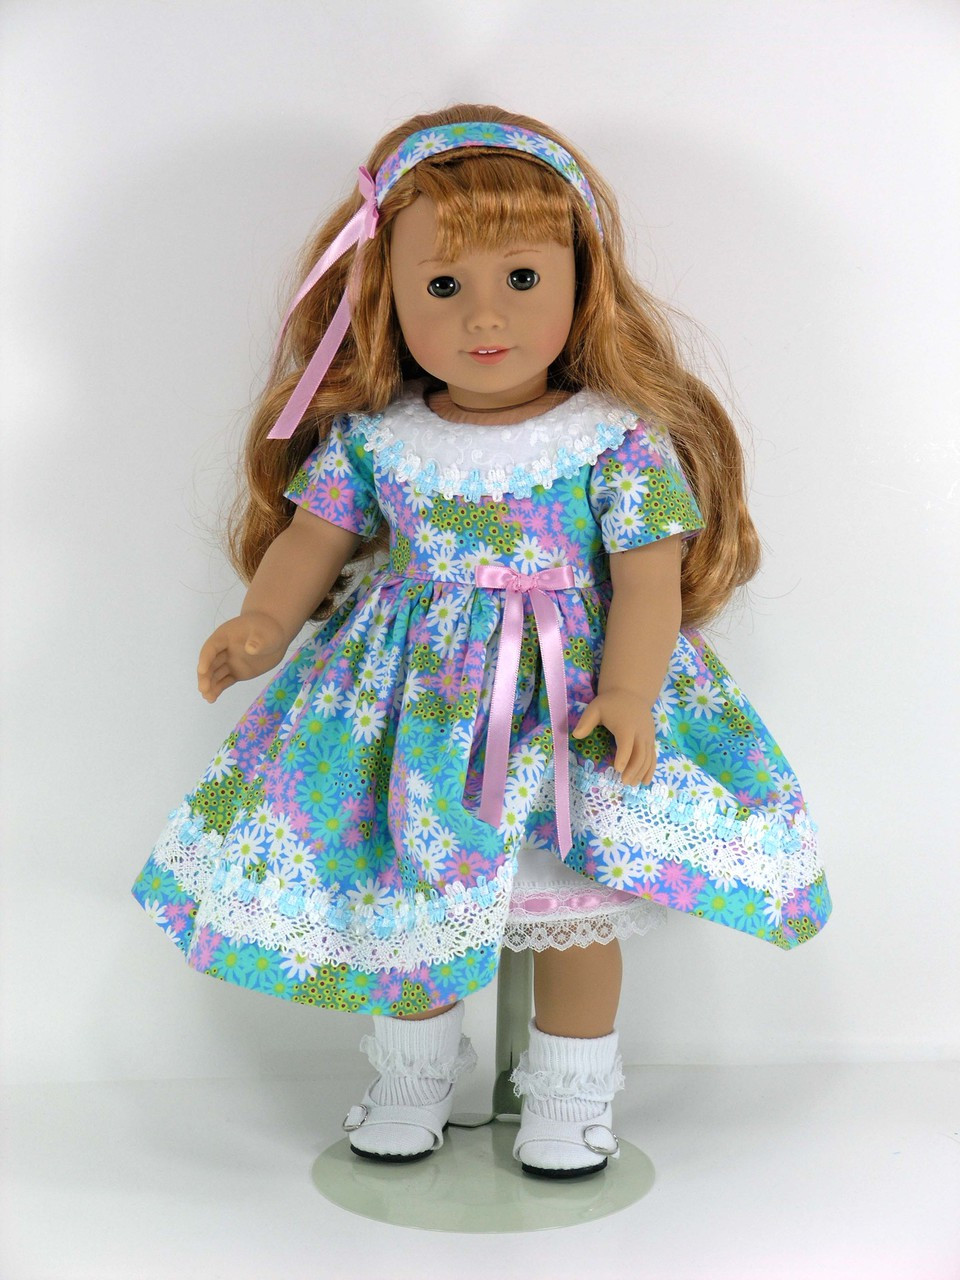 Doll Clothes Handmade for American Girl - Dress, Headband, Pantaloons - Pink,  Gold Lace and Taffeta - Exclusively Linda Doll Clothes